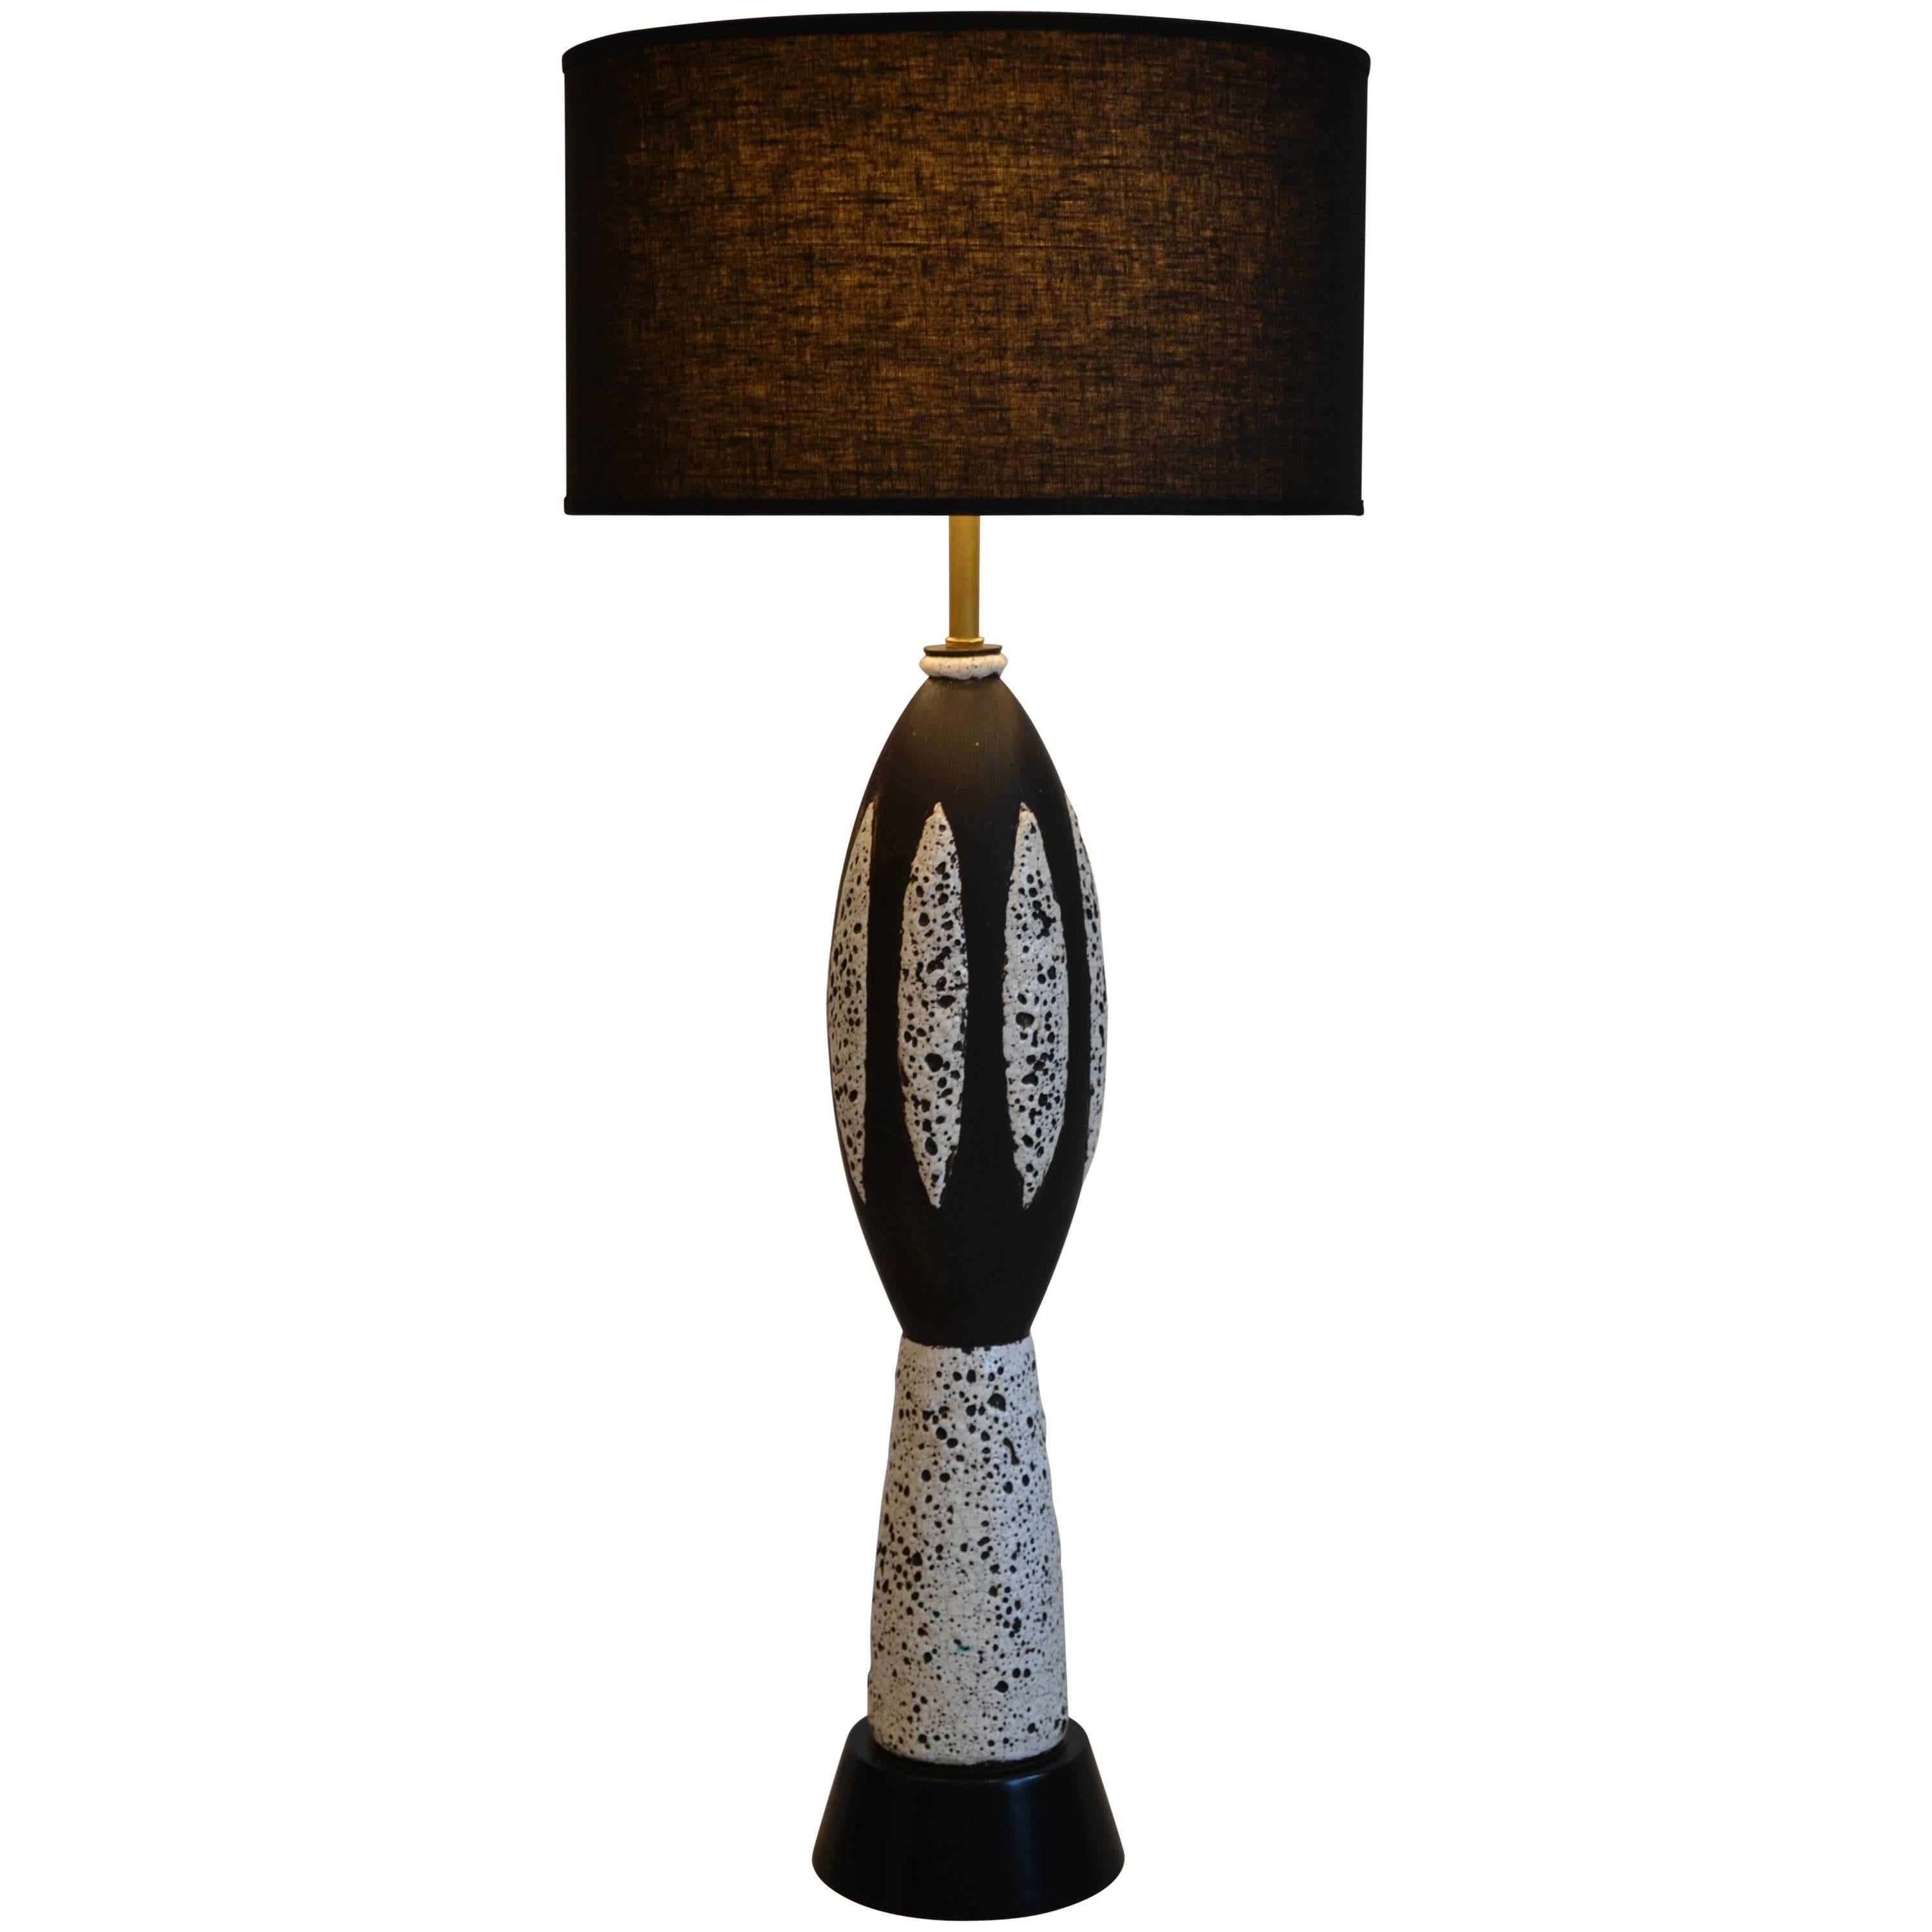 Mid-Century Modern Black and White Ceramic Table Lamp, Large Scale, 1950's